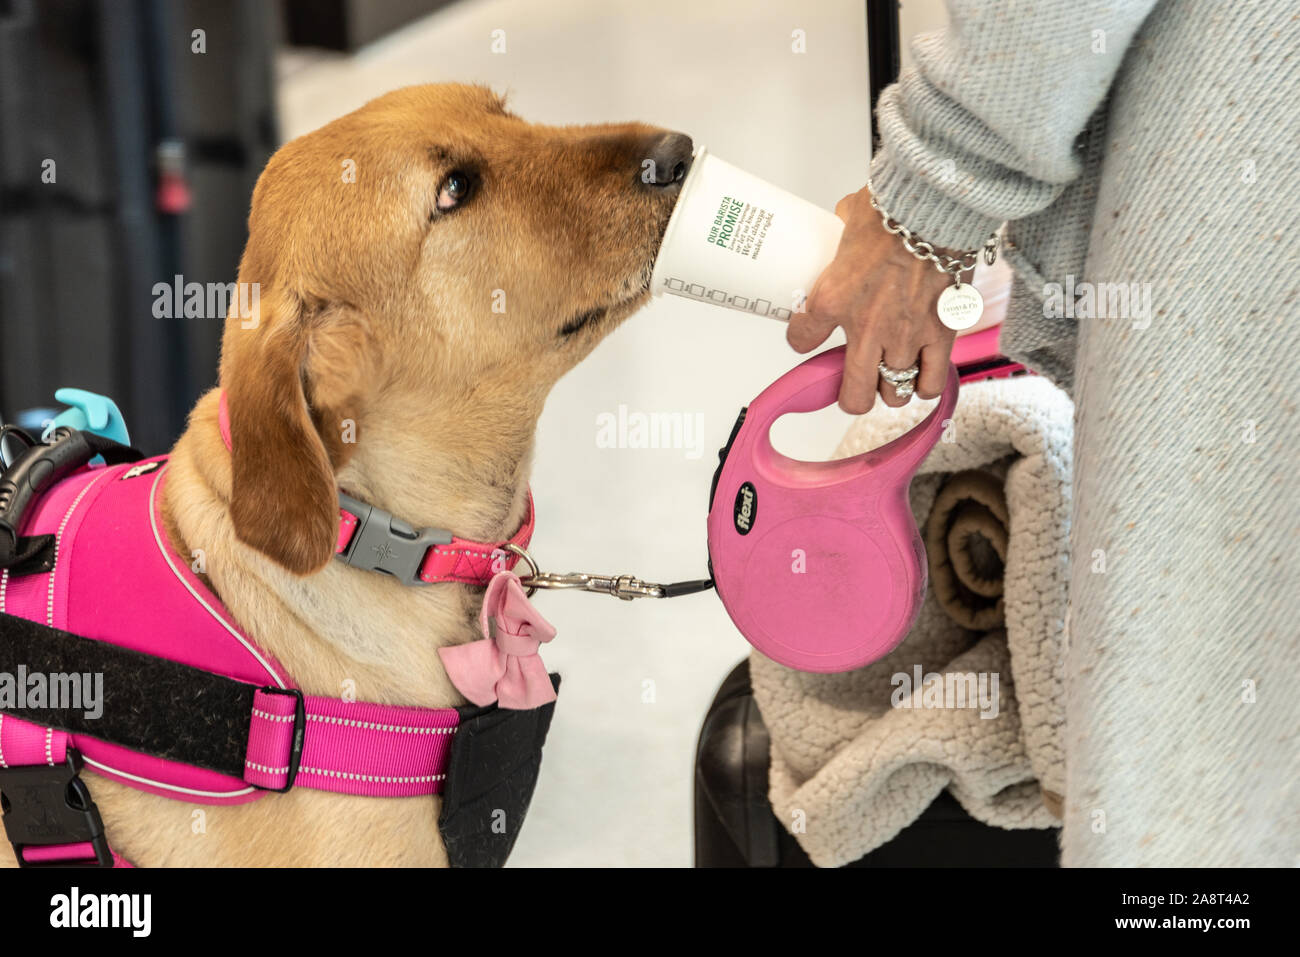 Woman traveler giving her companion dog a drink from her cup at Starbucks Coffee in the Hartsfield-Jackson Atlanta International Airport terminal. Stock Photo